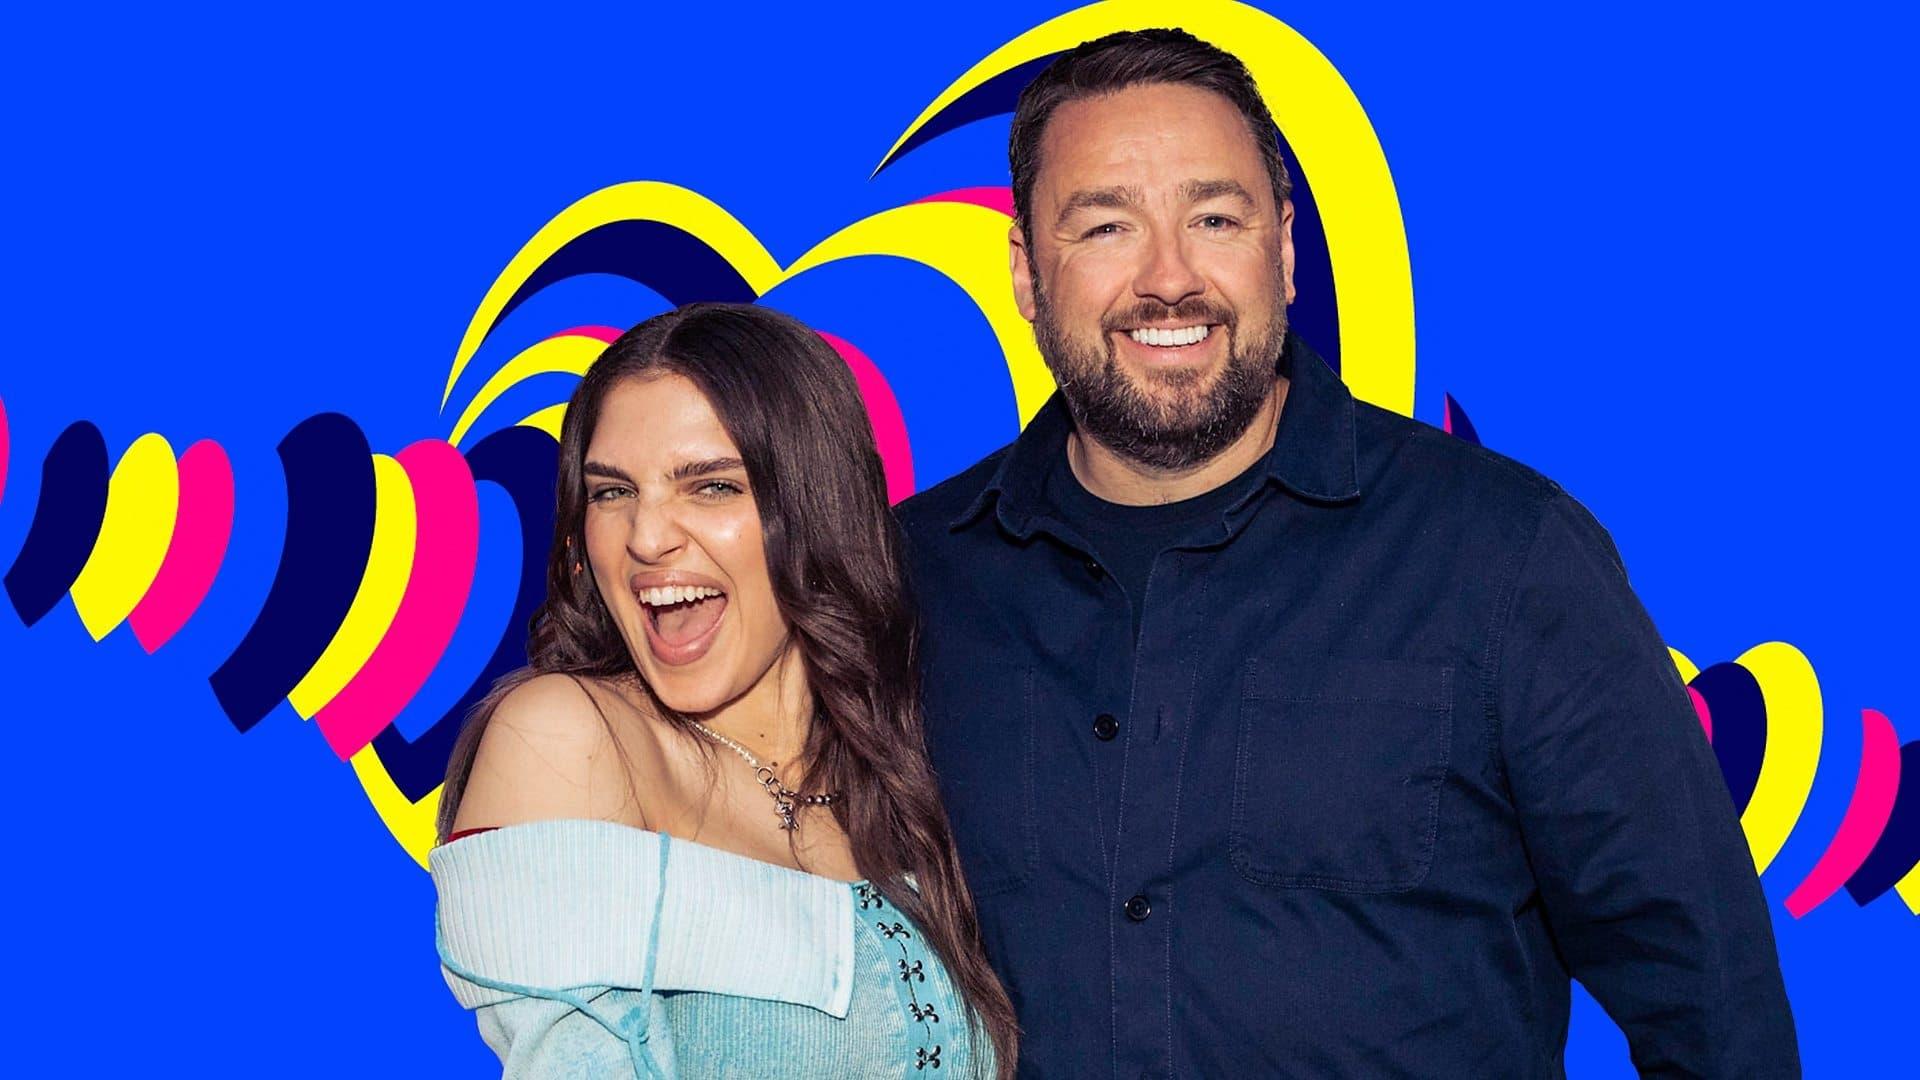 Eurovision Calling: Jason and Chelcee’s Ultimate Guide backdrop